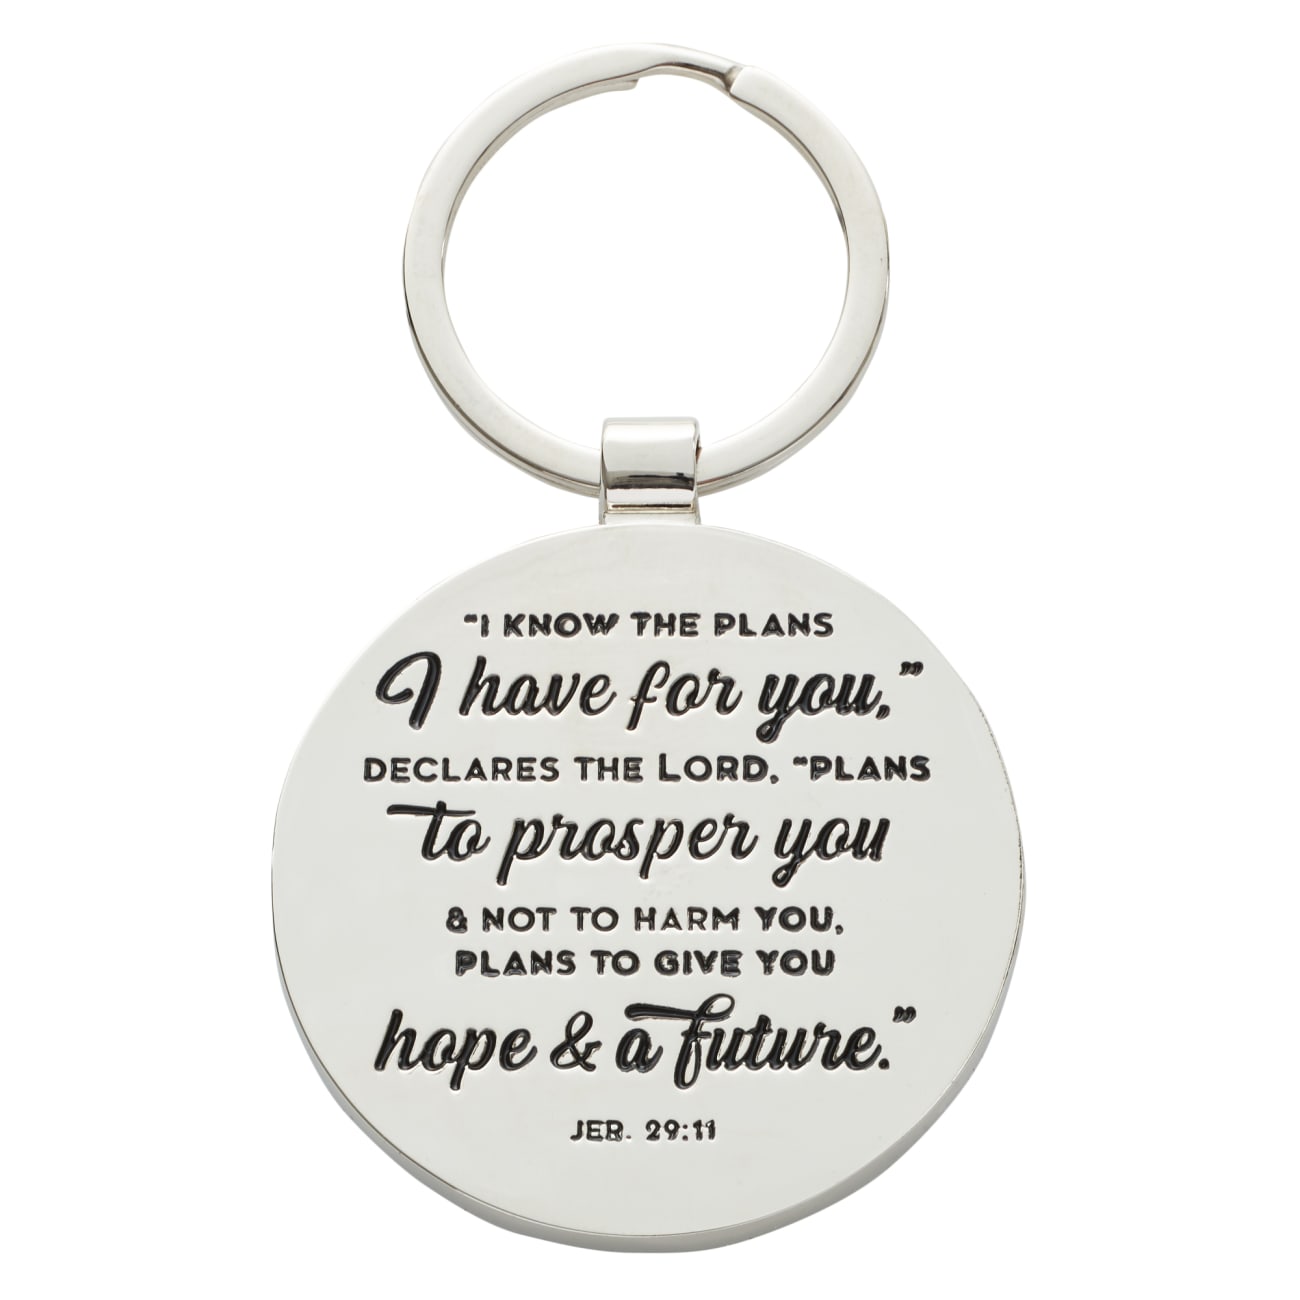 Metal Keyring in Tinbox: Hope & a Future, Blue/White Marble/Gold Etching (Jer 29:11) Jewellery